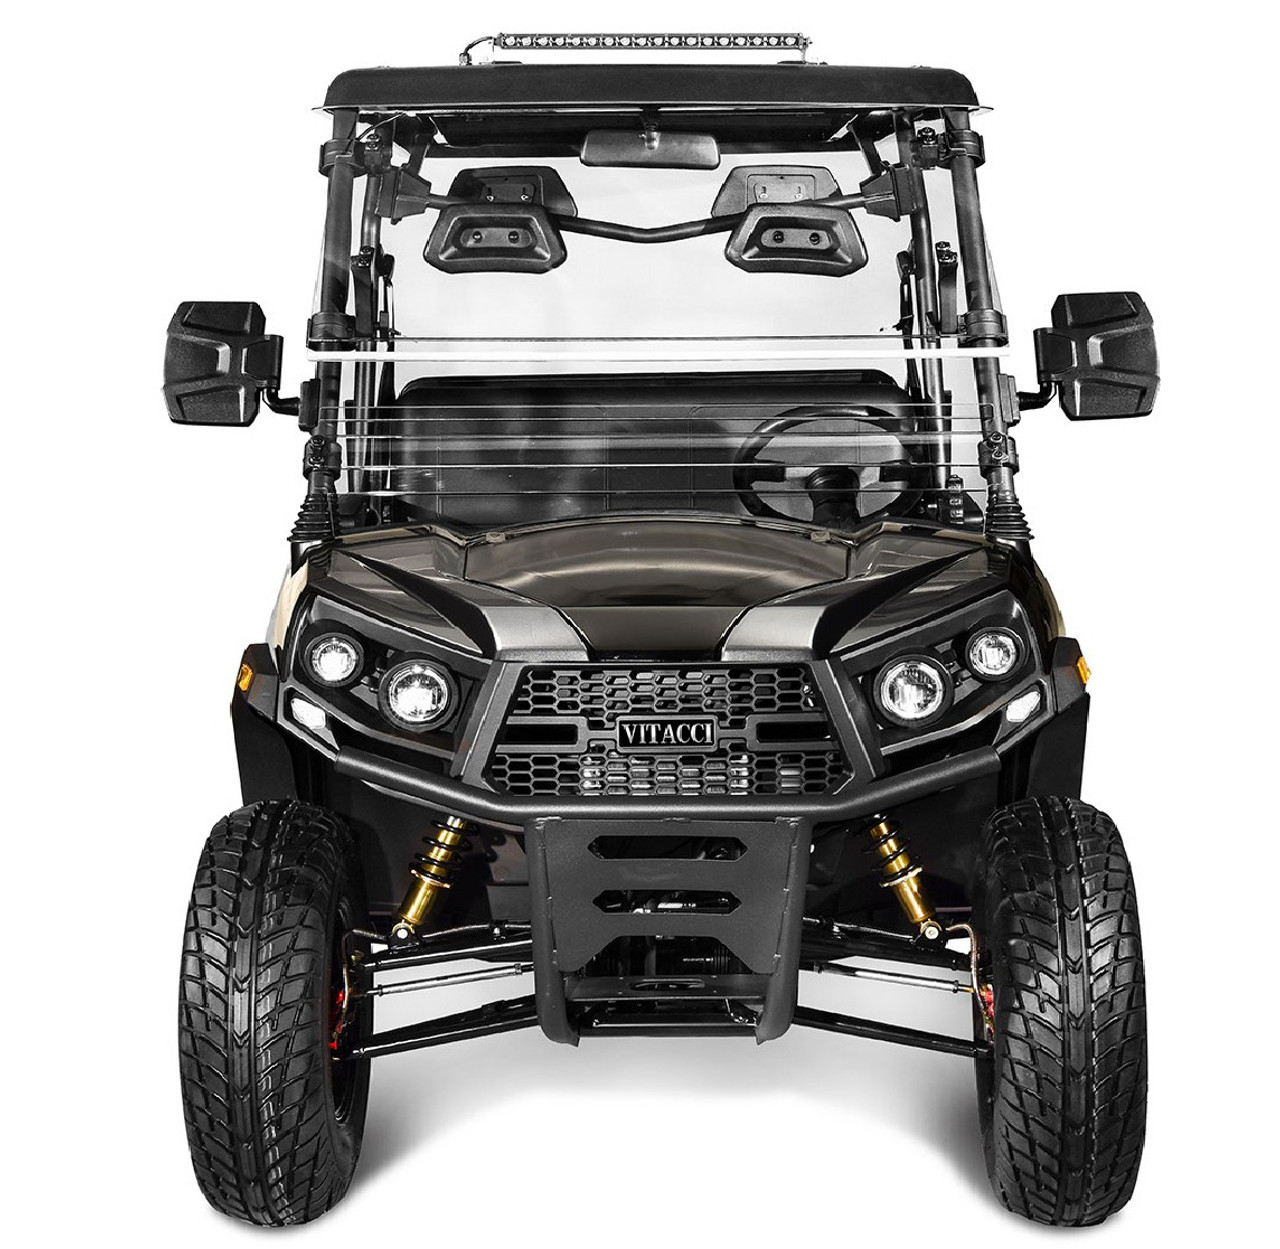 NEW VITACCI ELECTRIC GOLF CART ROVER AUTOMATIC COMES WITH LED BAR WINDSHIELD  - BLACK